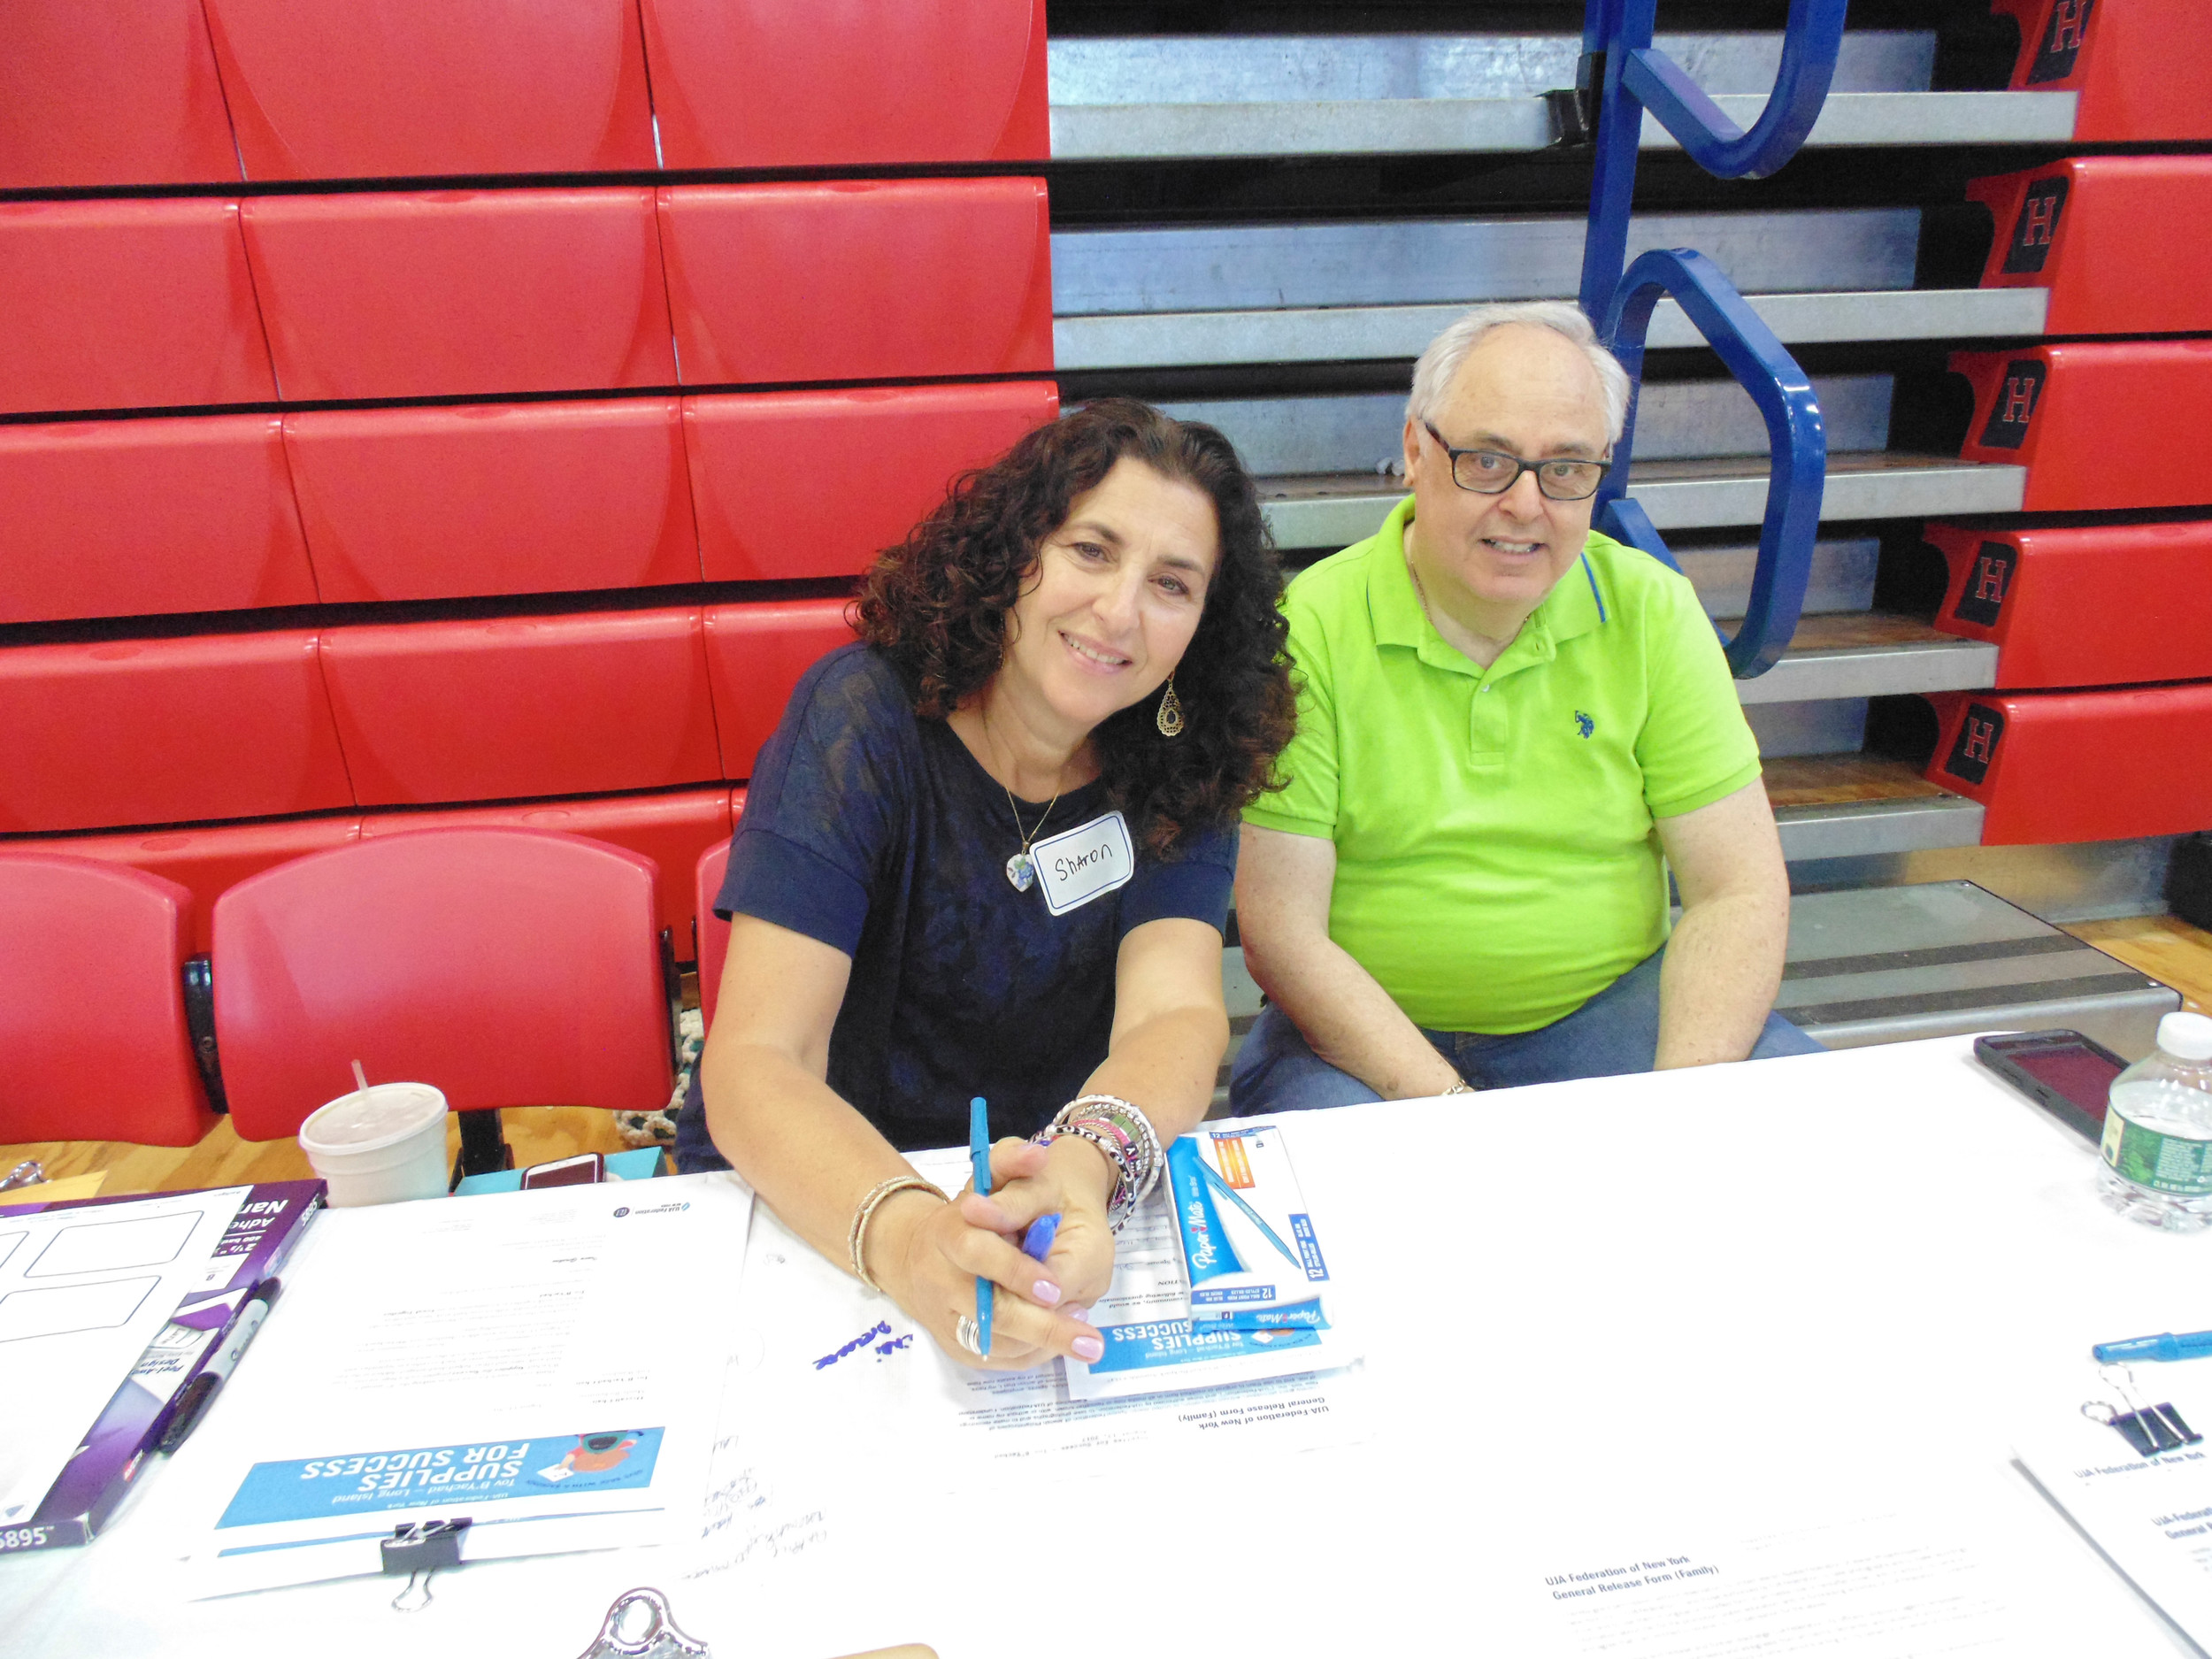 At the registration desk, Sharon Fogel and Irwin Gershon, helped the volunteers get organized at the Supplies for Success backpack packing event.